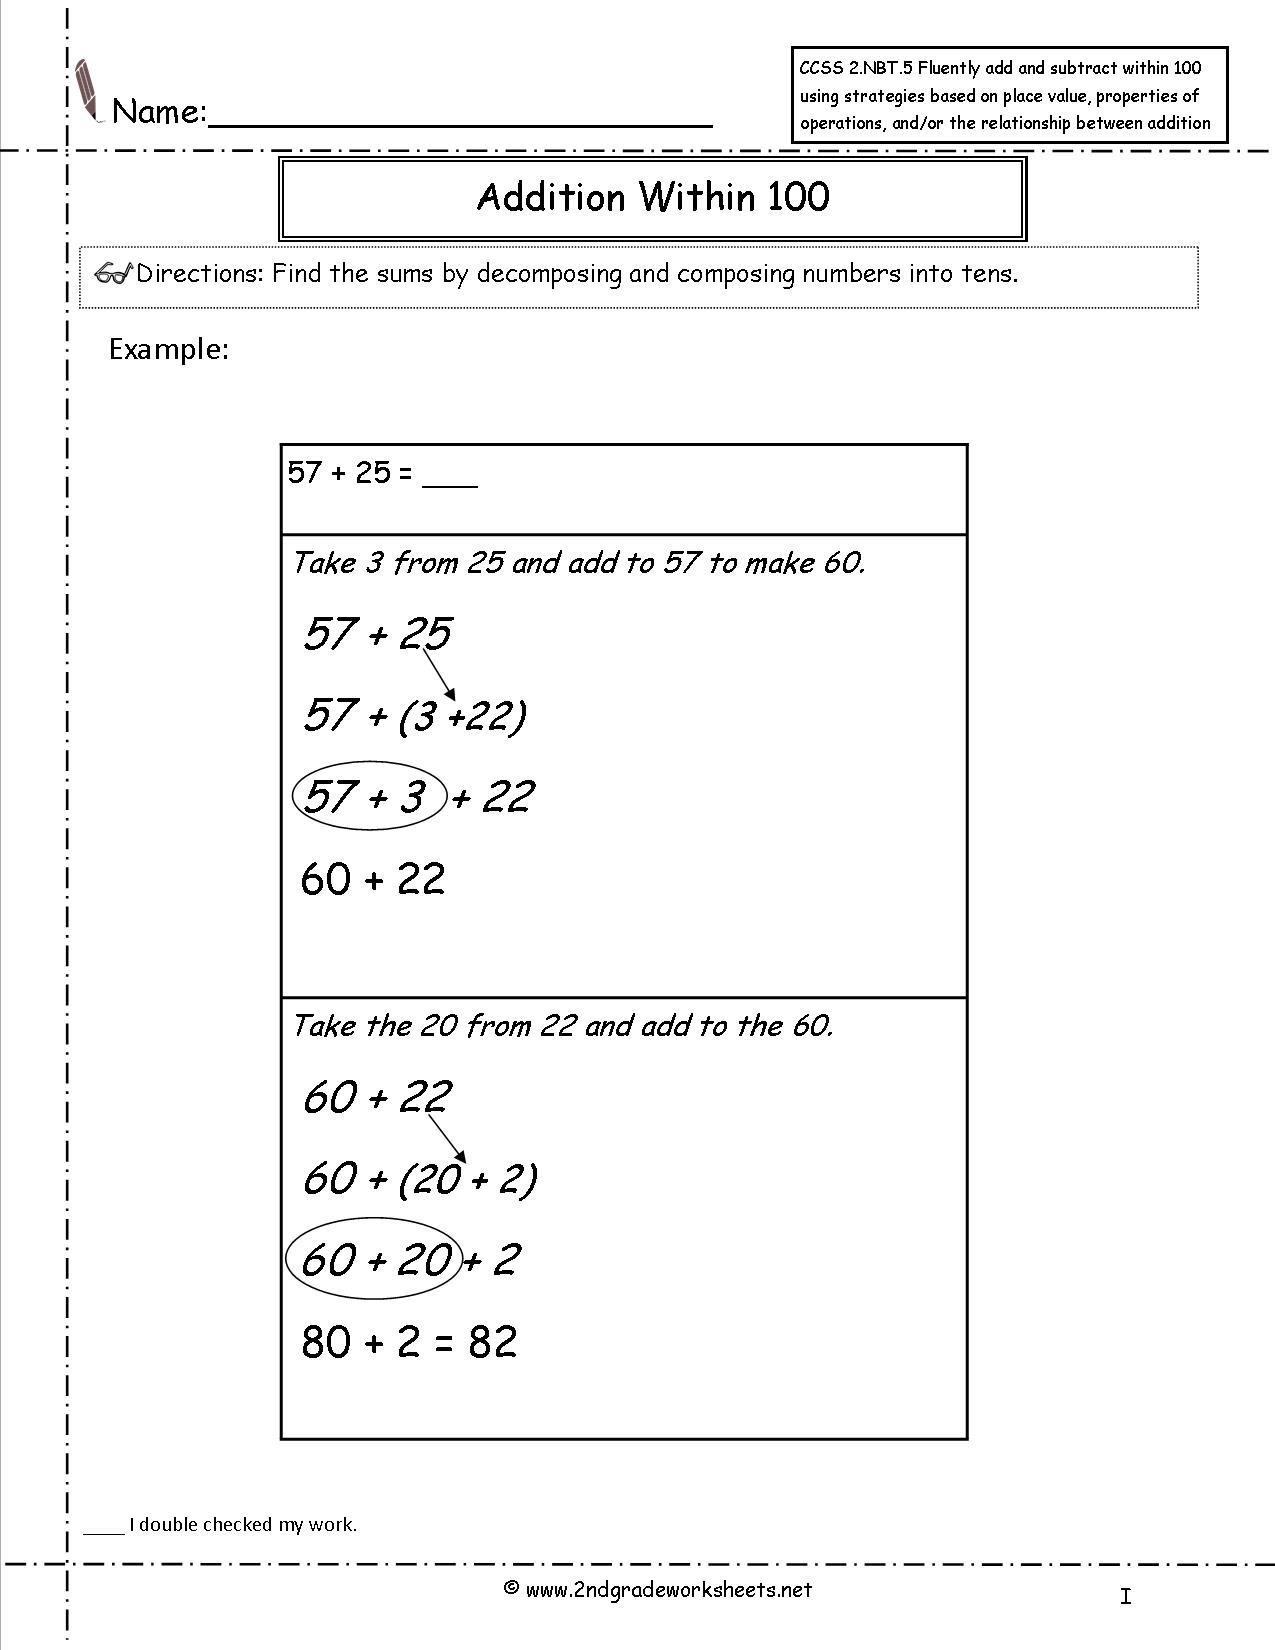 Common Core Addition and Subtraction Worksheets Image